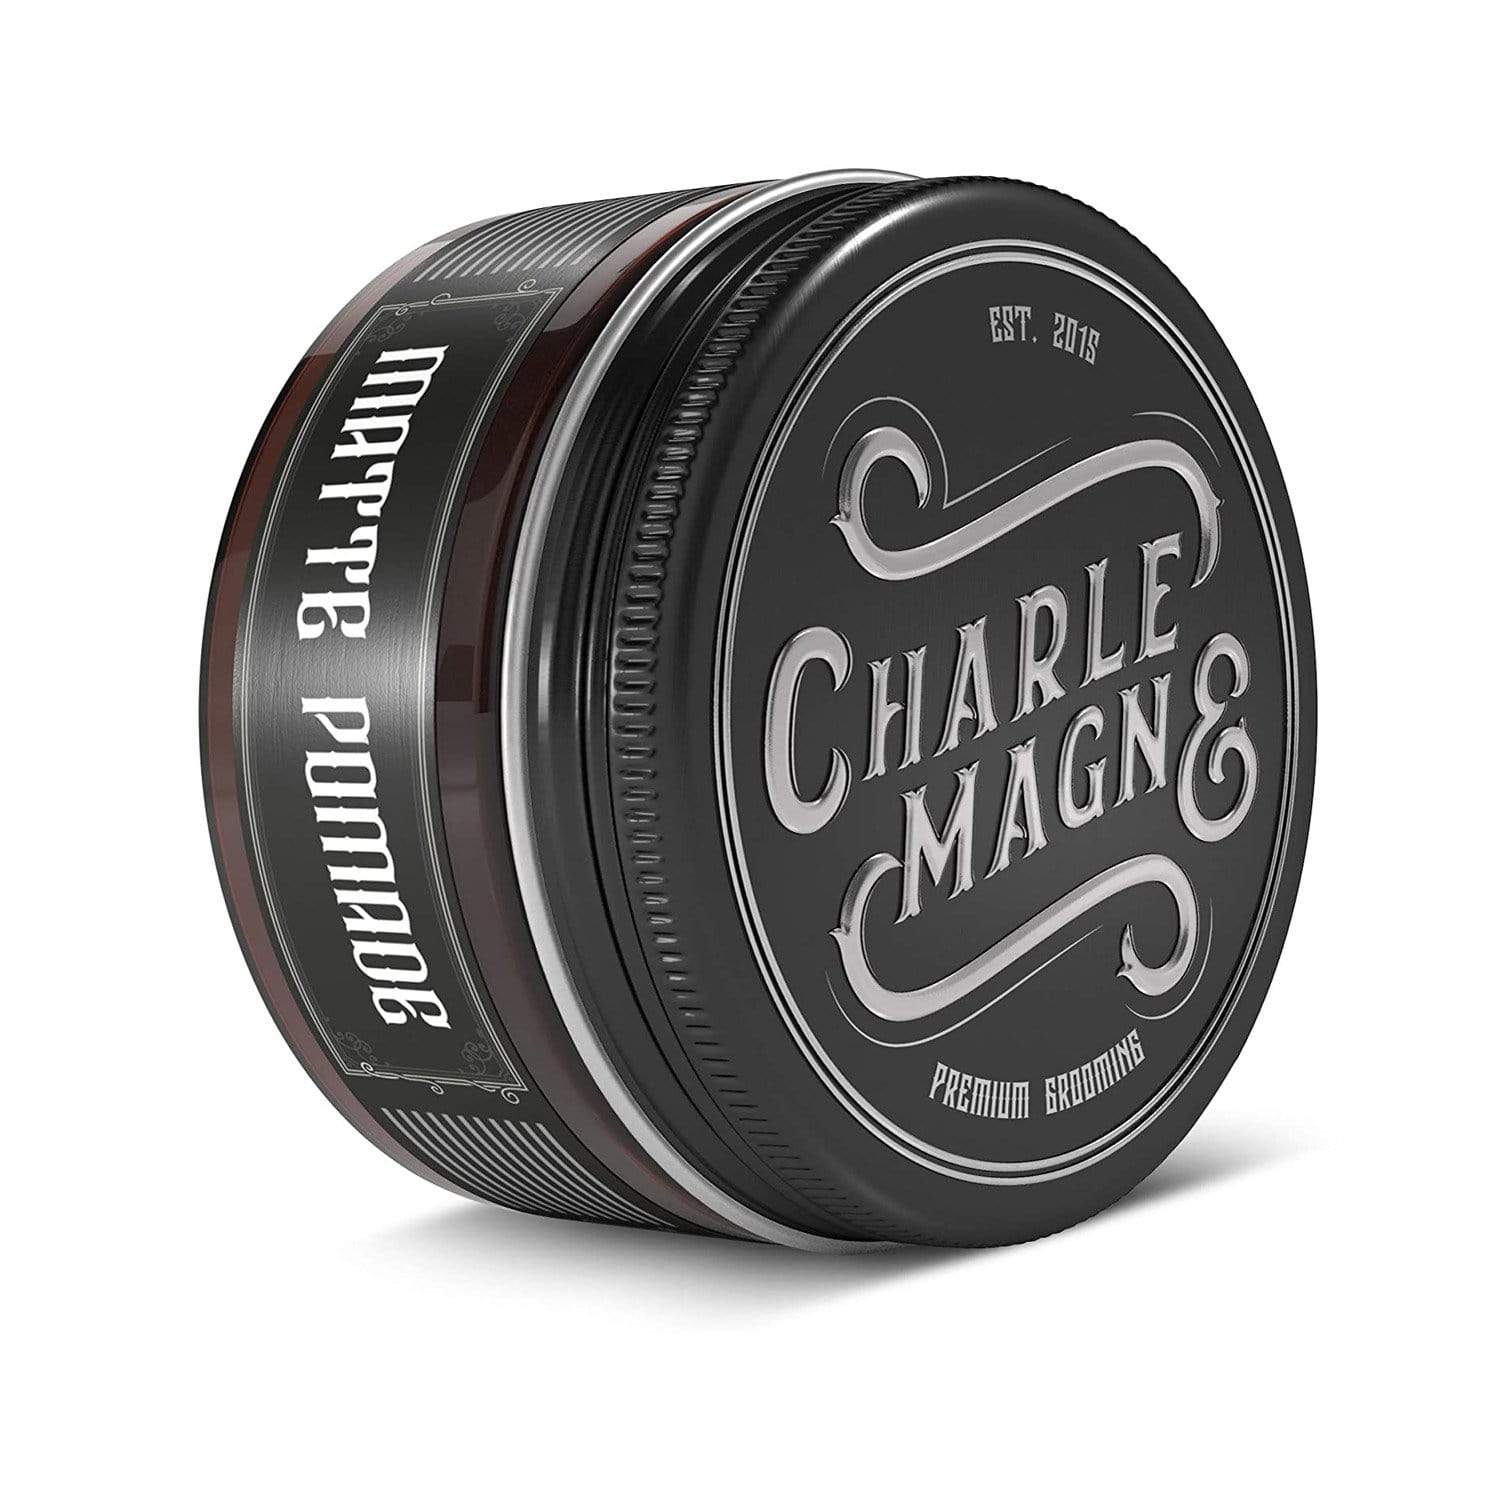 – Charlemagne Products Premium